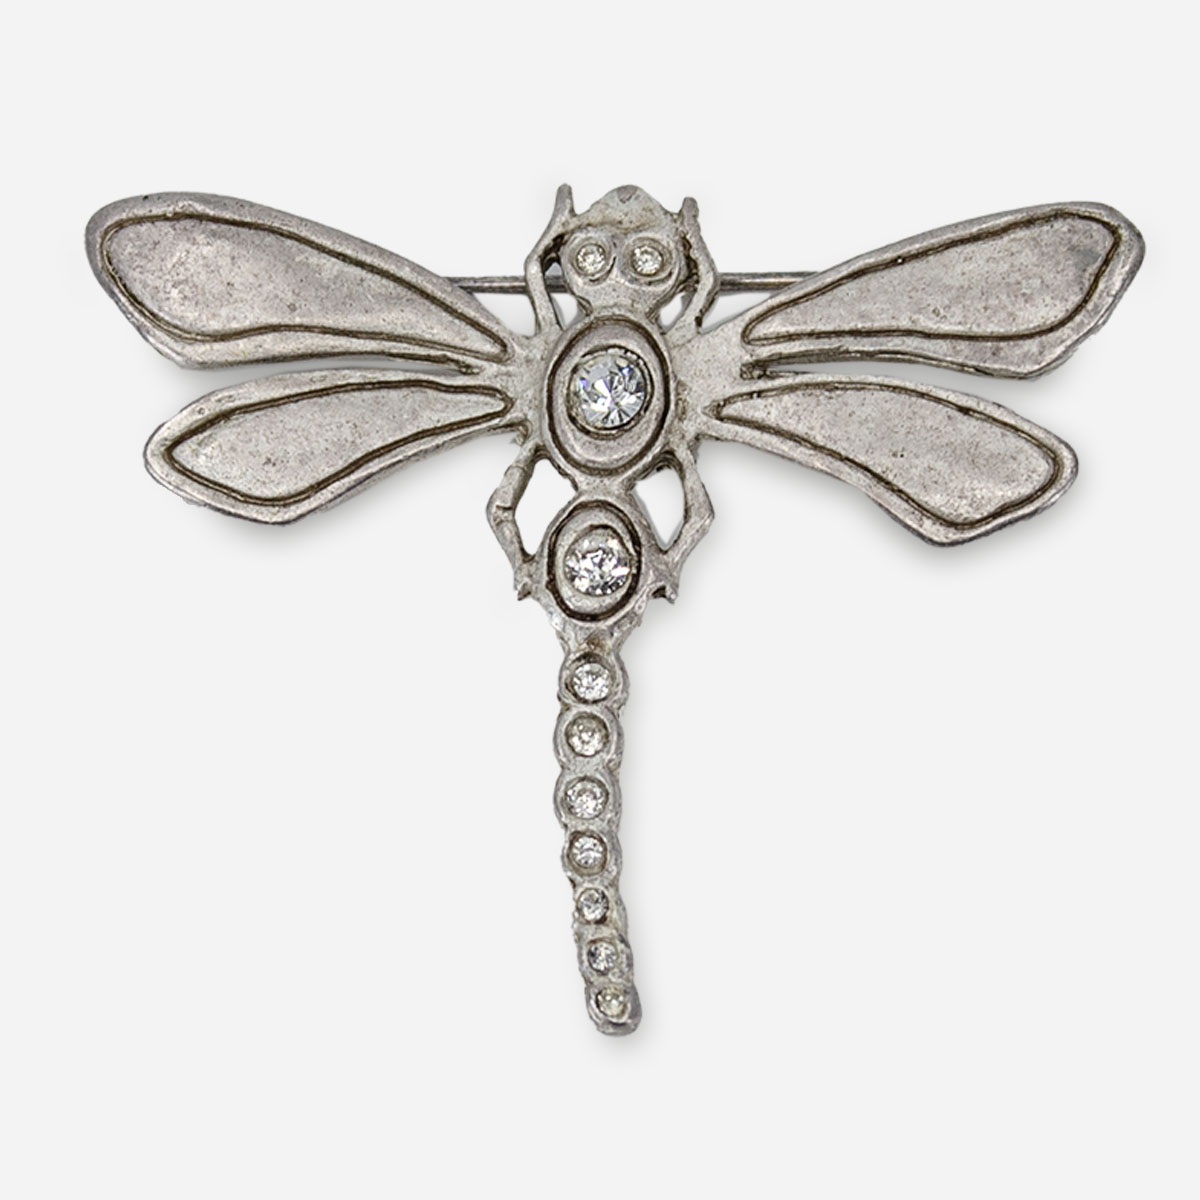 Jackie Spector Dragonfly pin